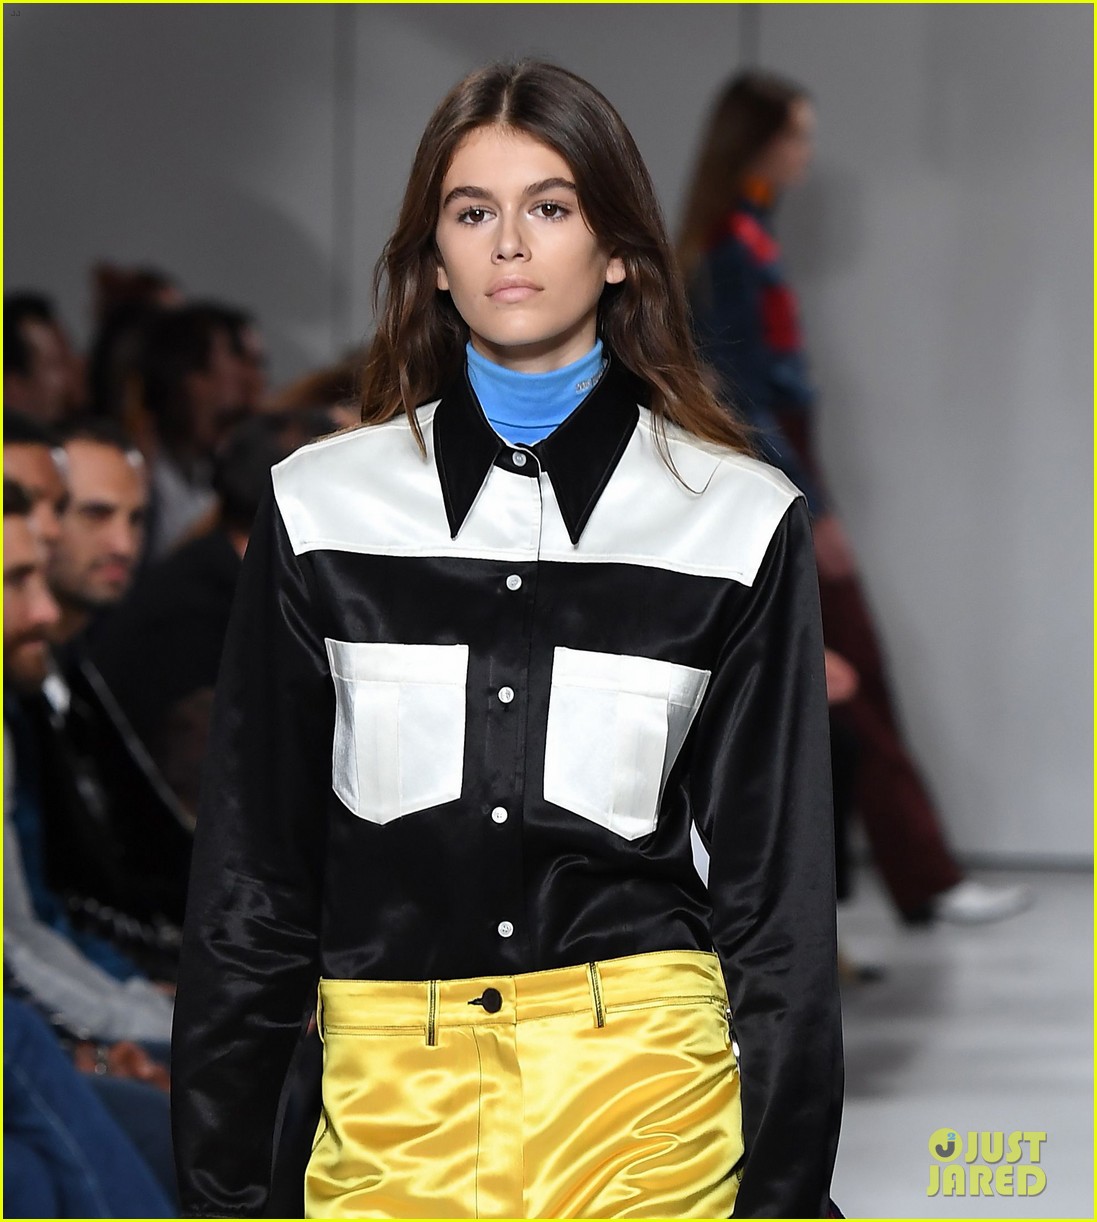 Full Sized Photo of kaia gerber makes runway debut in calvin klein show ...